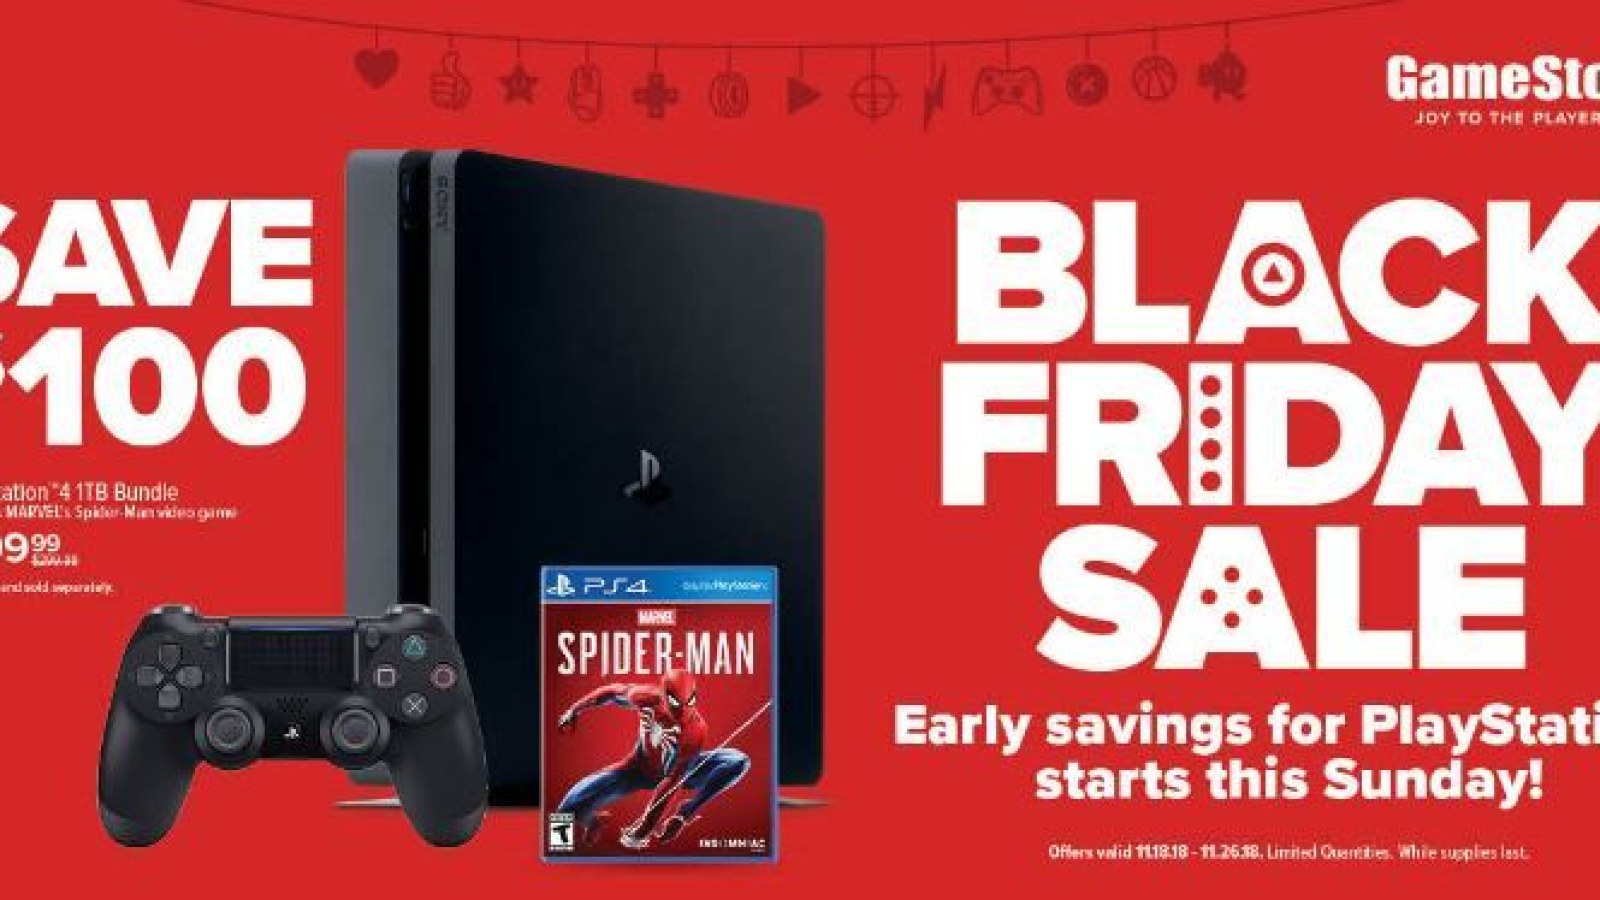 GameStop Black Friday 2018 Deals: Start Saving Early on Xbox and PS4